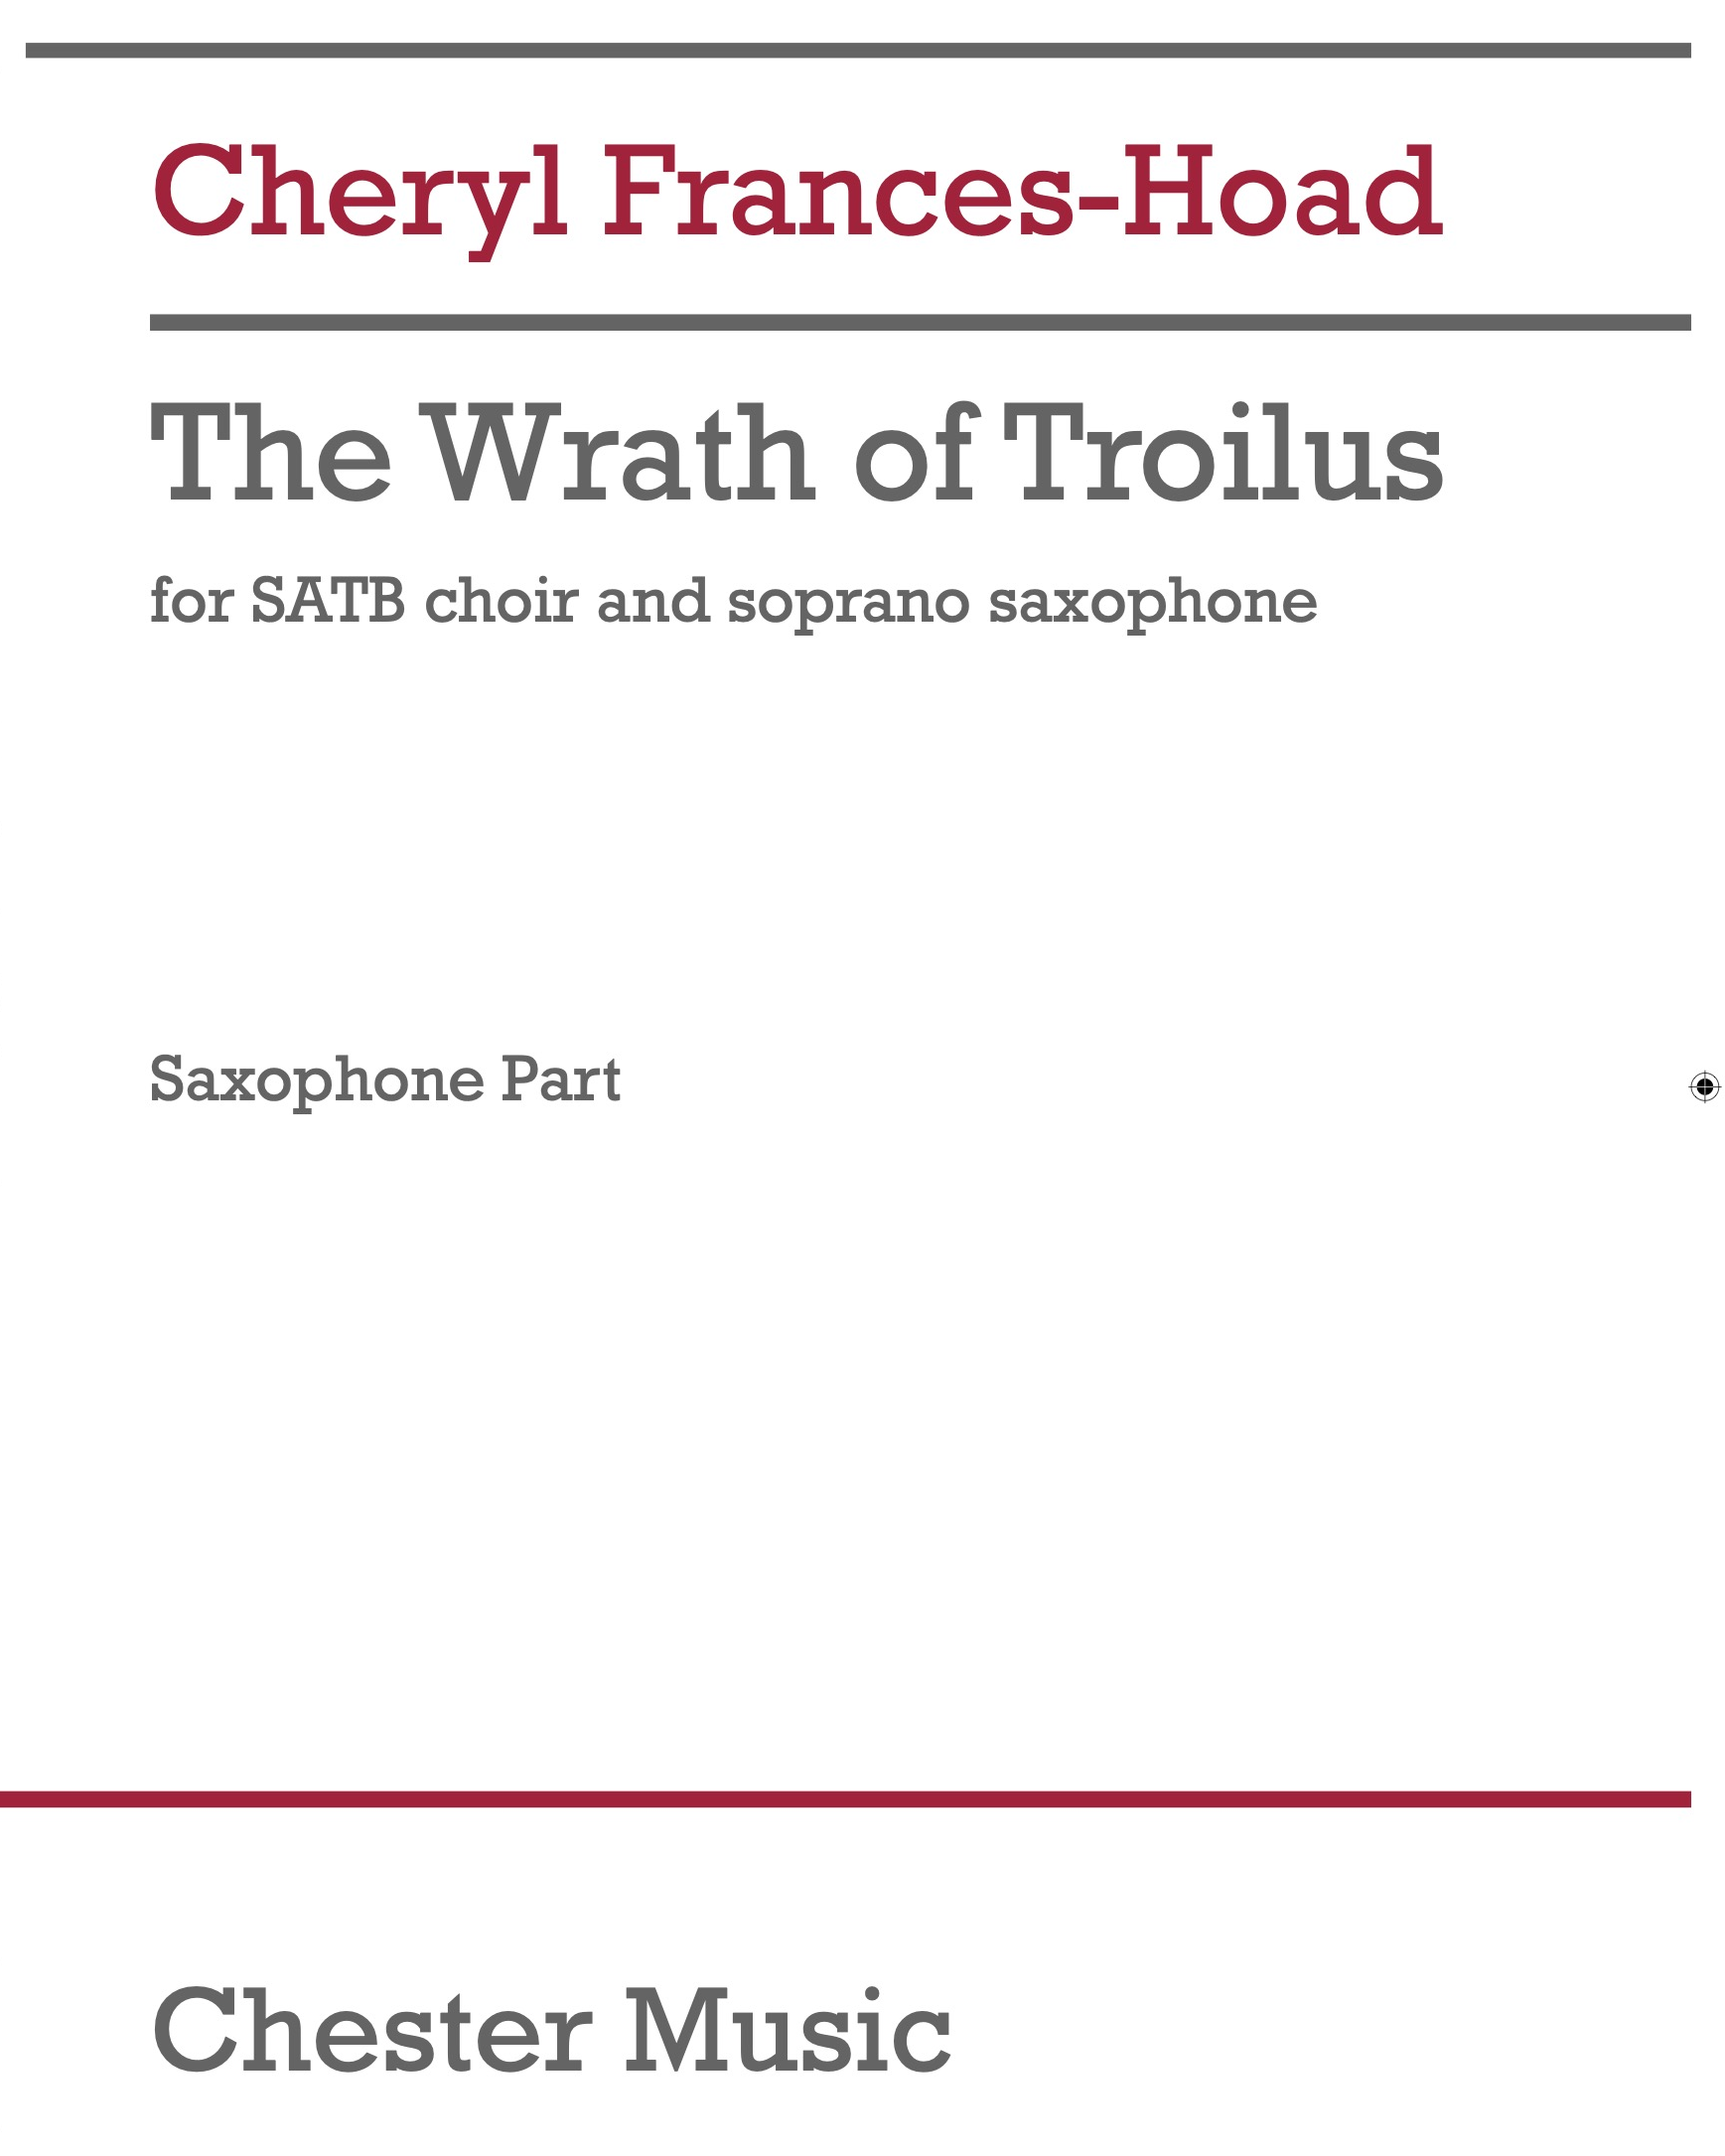 The Wrath of Troilus